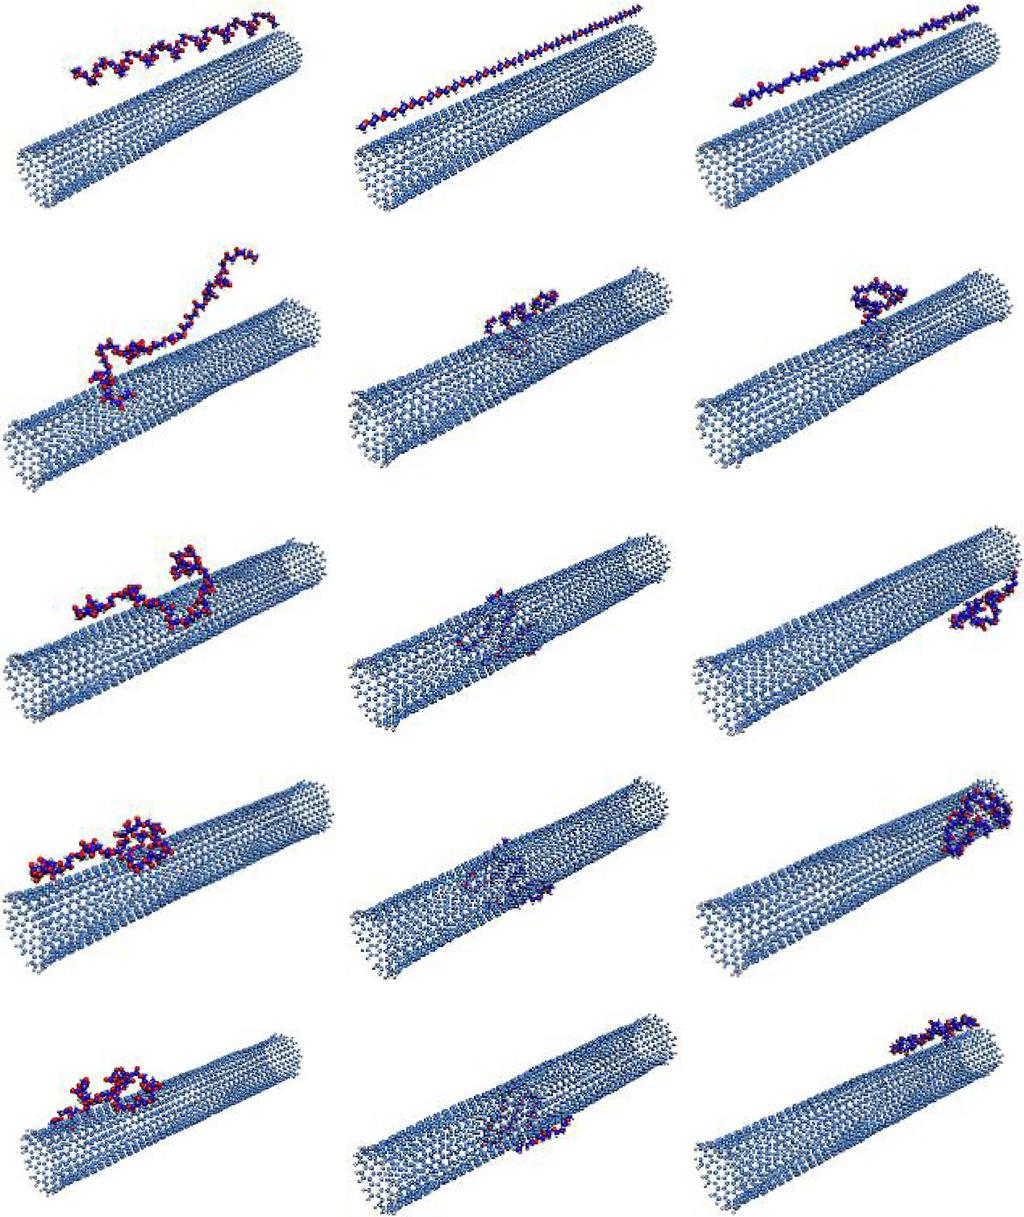 Braz J Phys (2015) 45:10 18 13 0ps 10ps 30ps 50ps 100ps Polyglycolide Poly(ethylene oxide) (c) Polyketone Fig. 3 Snapshots of polymer chains along the SWCNT at different time steps. a Polyglycolide.